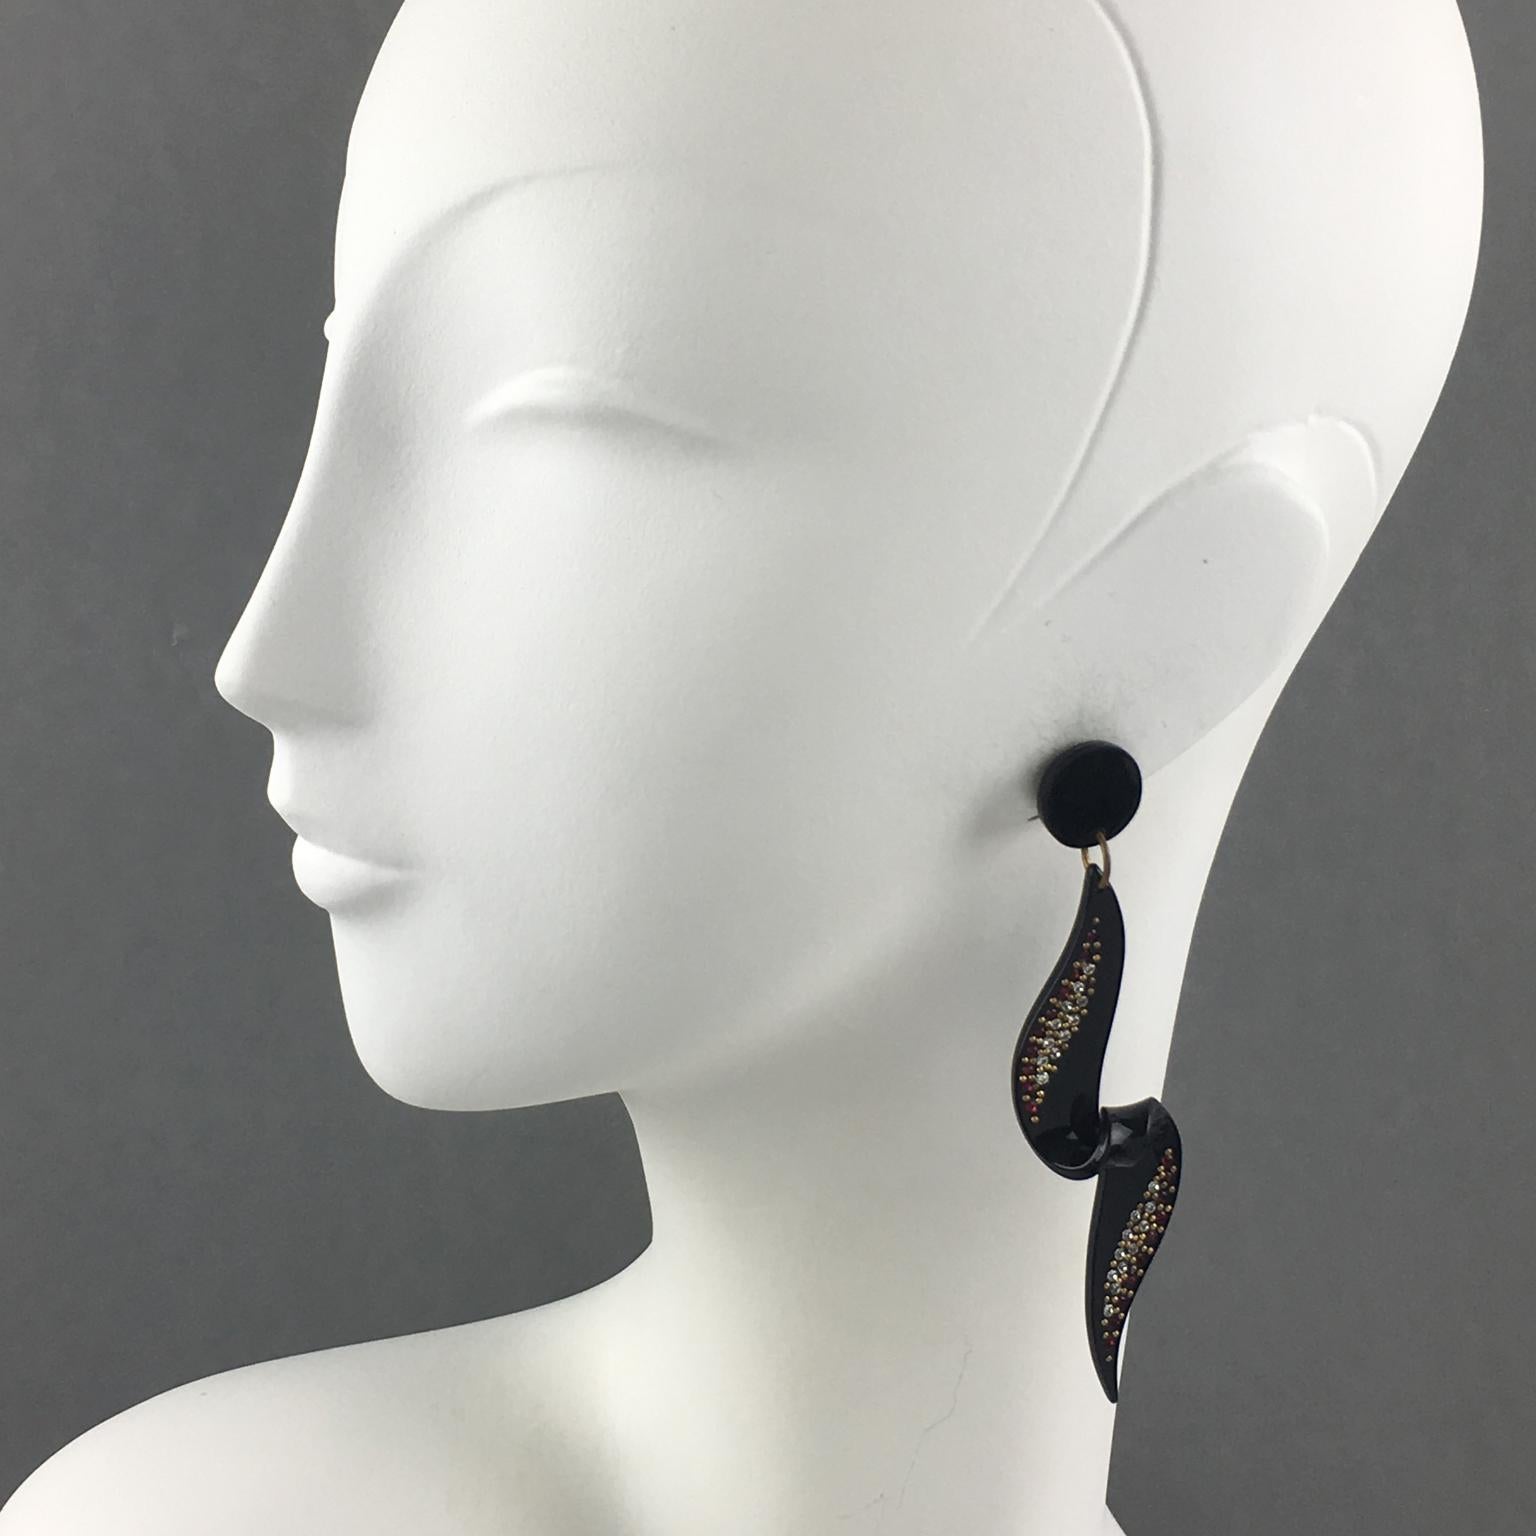 These spectacular long Lucite dangling clip-on earrings feature a geometric dimensional coiled pattern in shiny black color ornate with red and clear tiny crystal rhinestones and brass studs. They have the regular French clip back. There is no